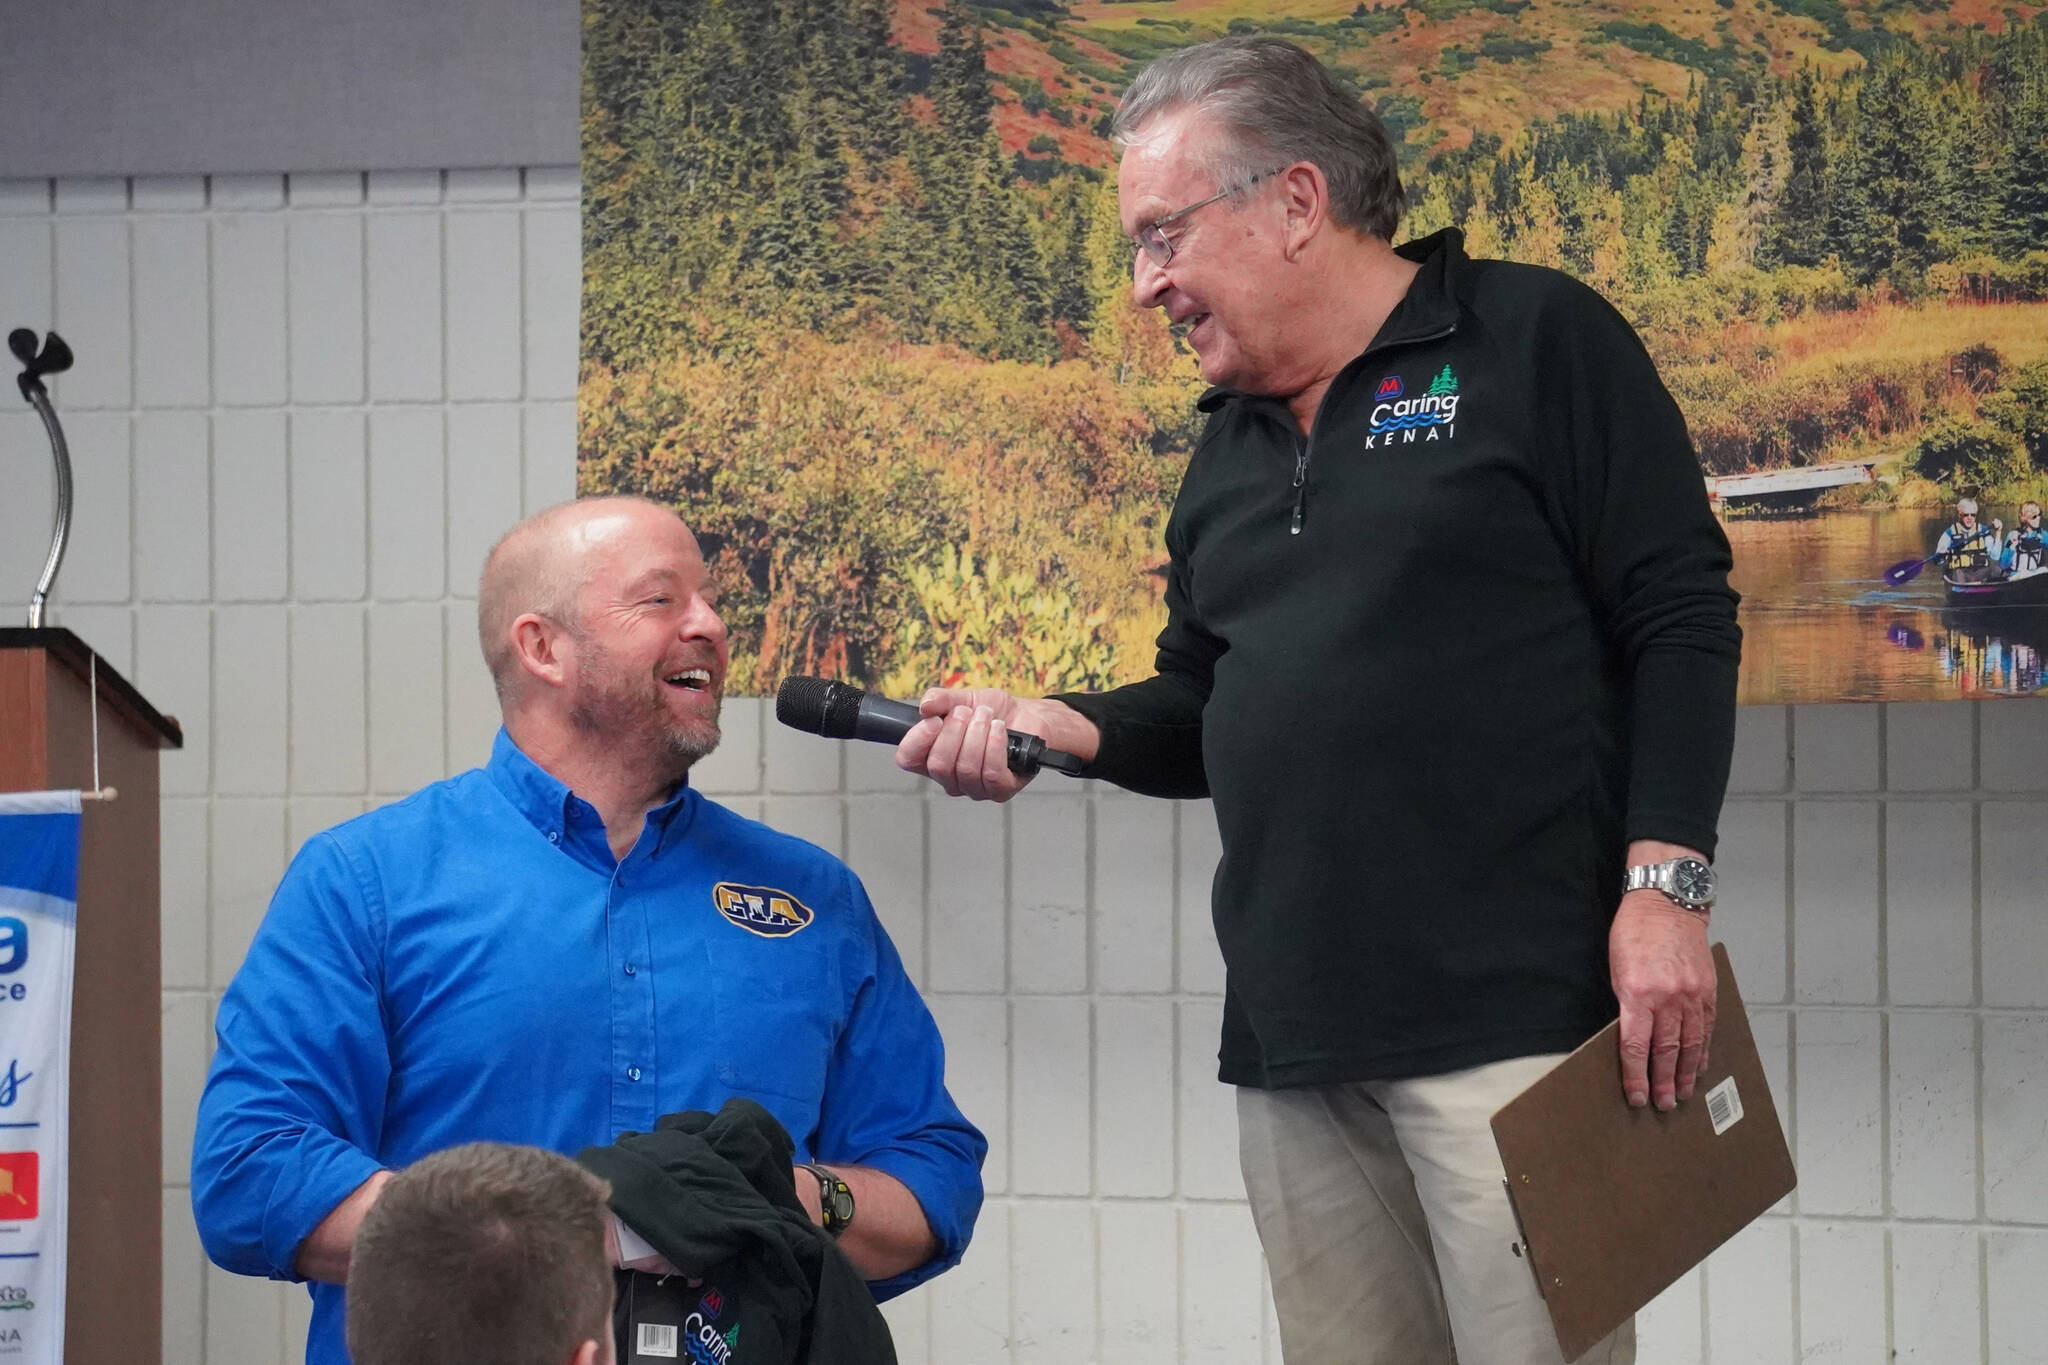 Kenny Leaf, a teacher at Cook Inlet Academy, speaks with Merrill Sikorski at the Caring for the Kenai Awards Celebration held during a Joint Chamber Luncheon on Wednesday, May 3, 2023, at the Soldotna Regional Sports Complex in Soldotna, Alaska. (Jake Dye/Peninsula Clarion)